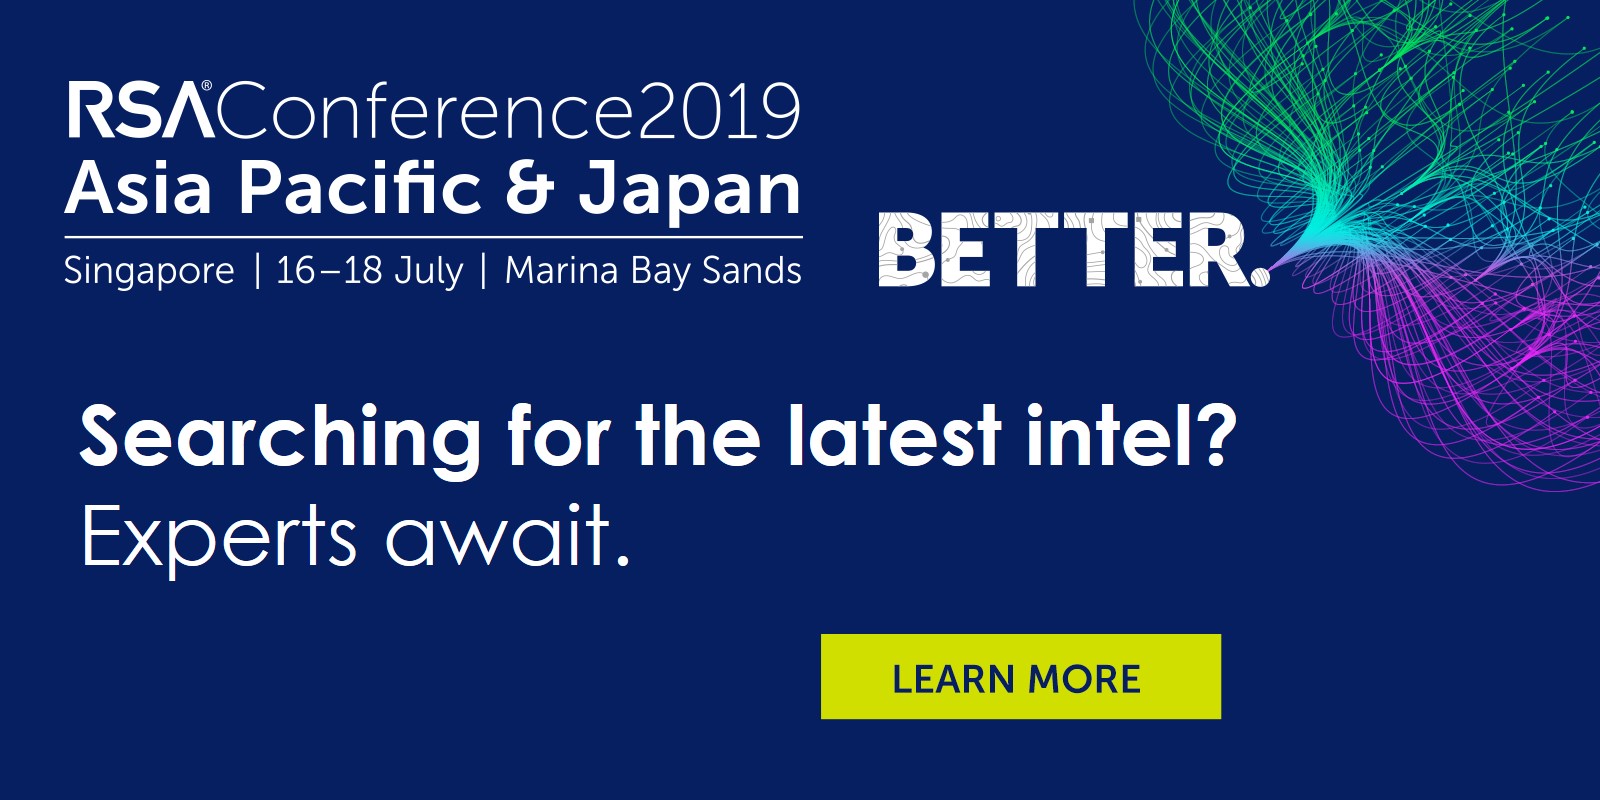 RSA Conference 2019 Asia Pacific & Japan